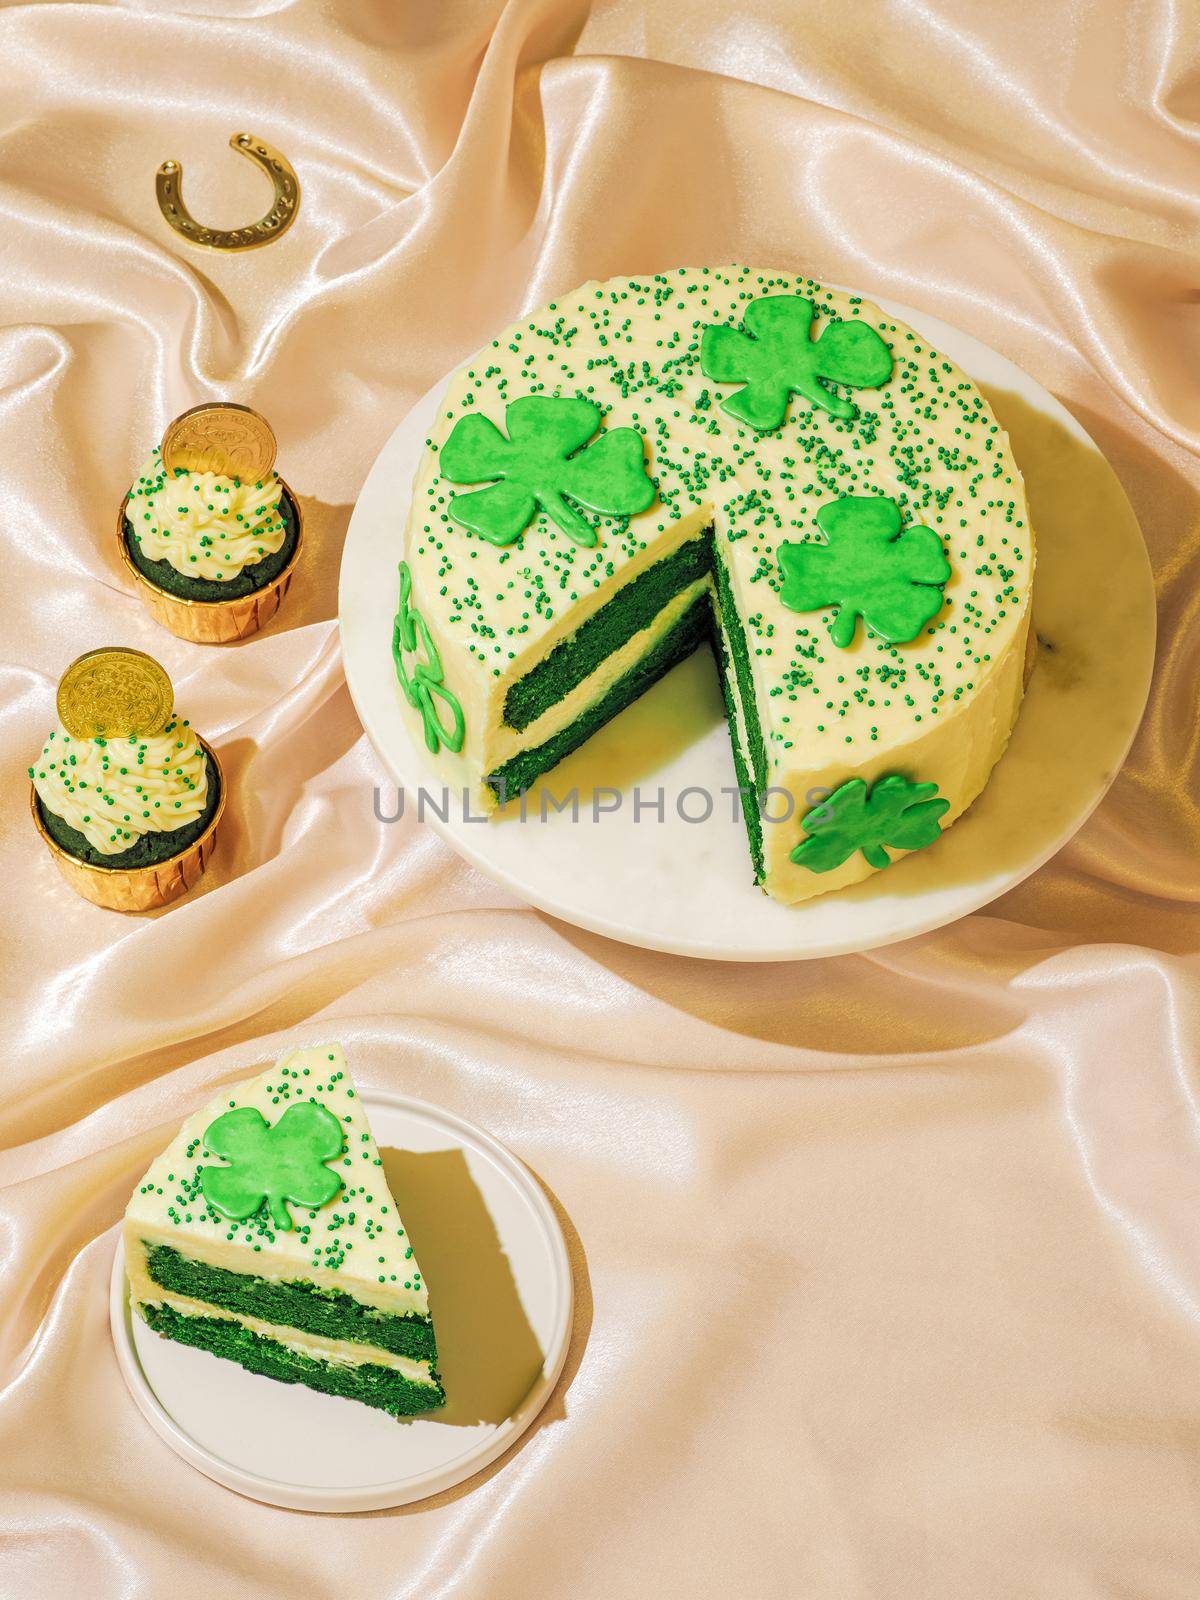 St Patricks Day sweet food concept. Sweet desserts for Saint Patrick's Day party - cake decorated shamrocks, green velvet cupckakes, chocolate golden coins and horseshoe on satin. Copy space. Vertical